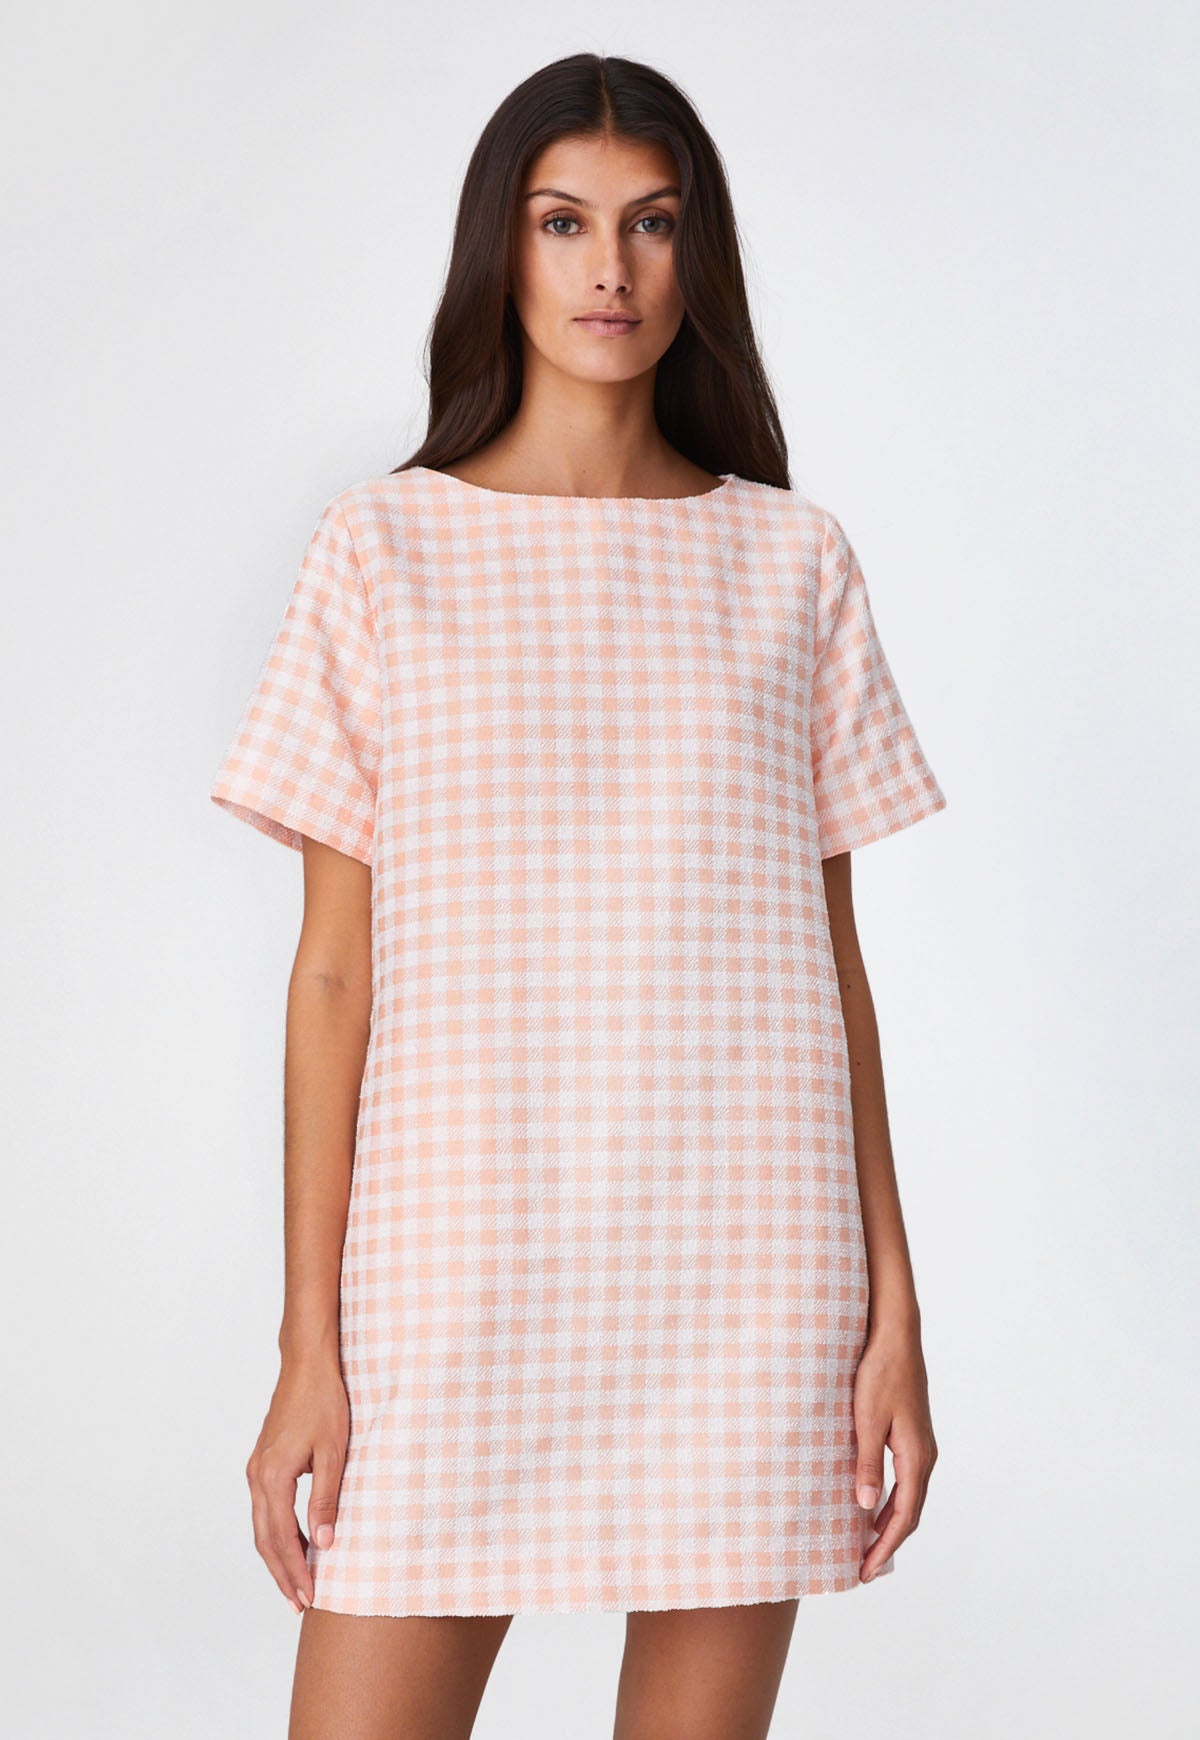 THE T-SHIRT DRESS in CORAL GINGHAM BOUCLE COTTON